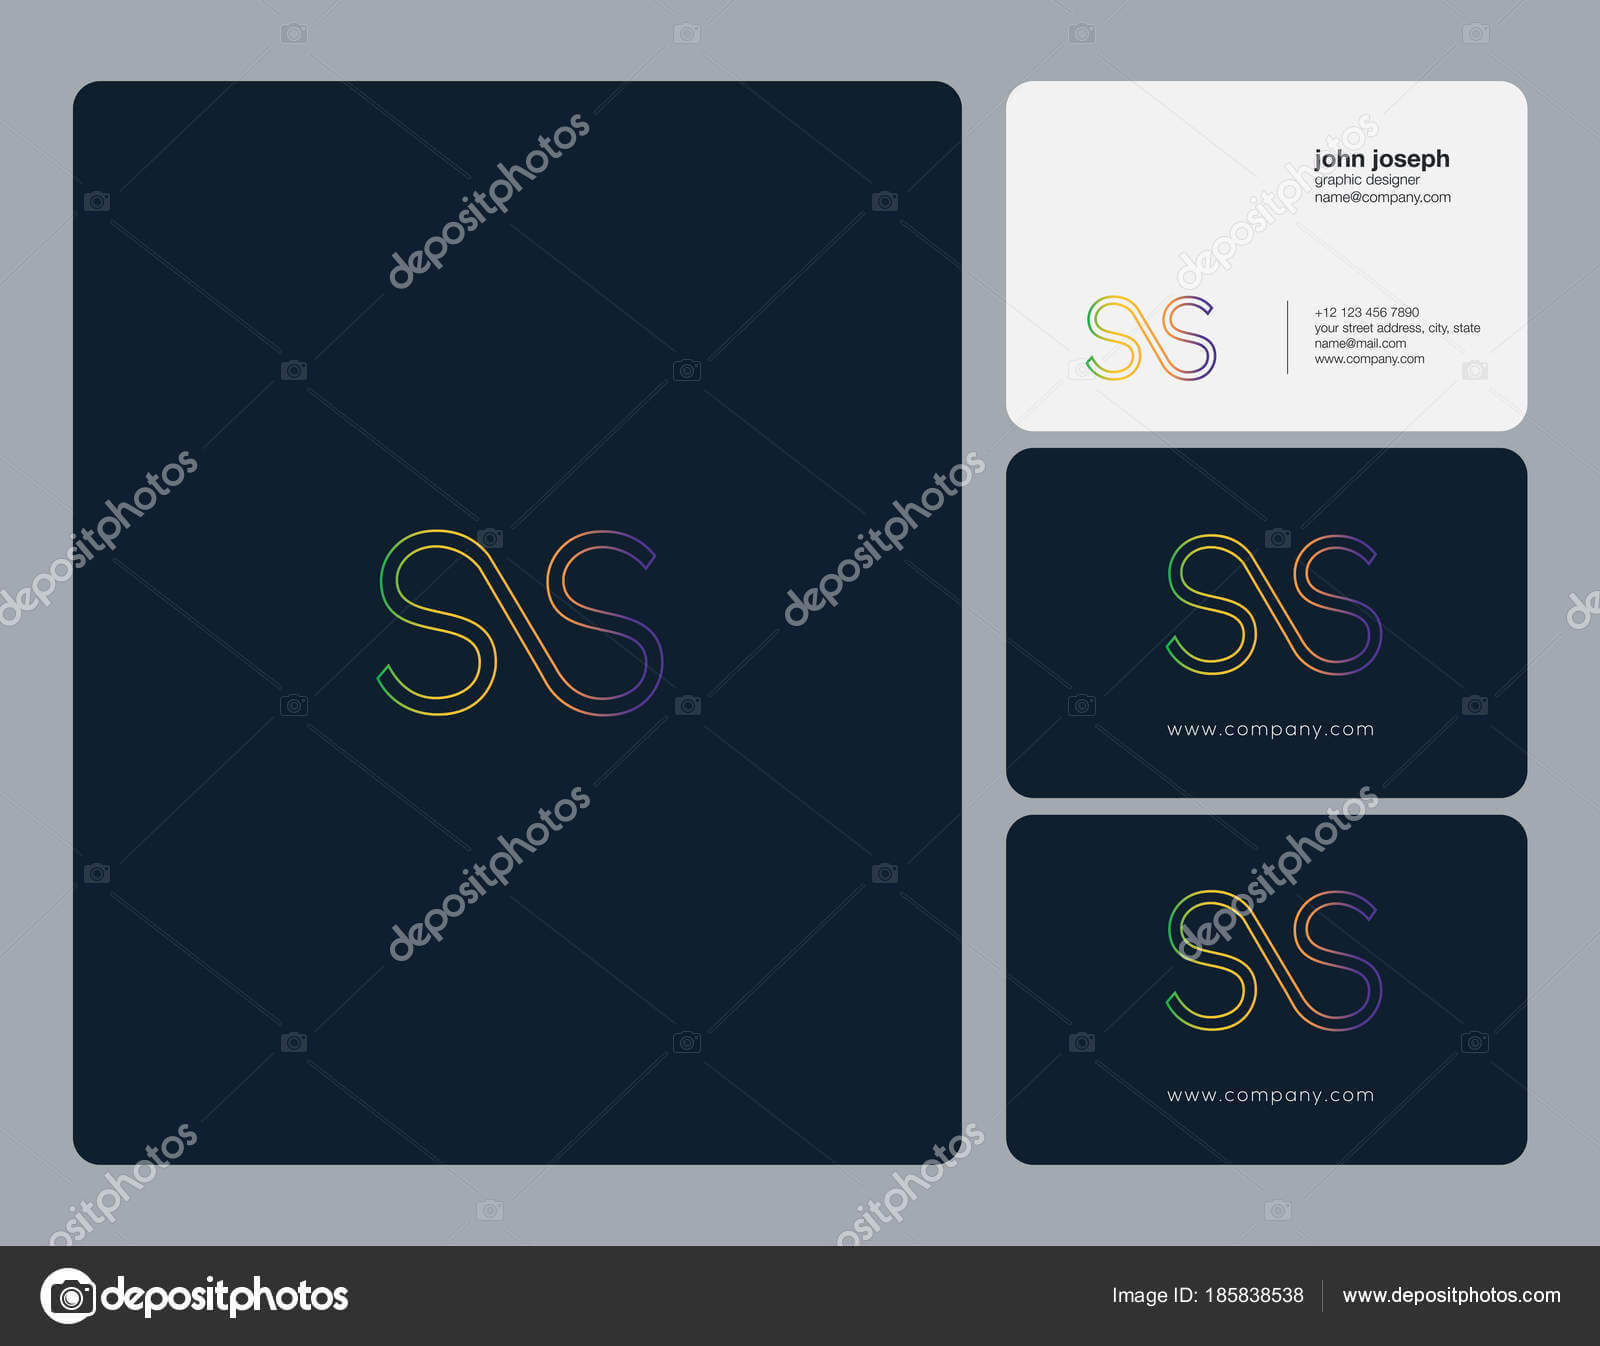 Ss Card Template | Joint Letters Logo Business Card Template Throughout Ss Card Template